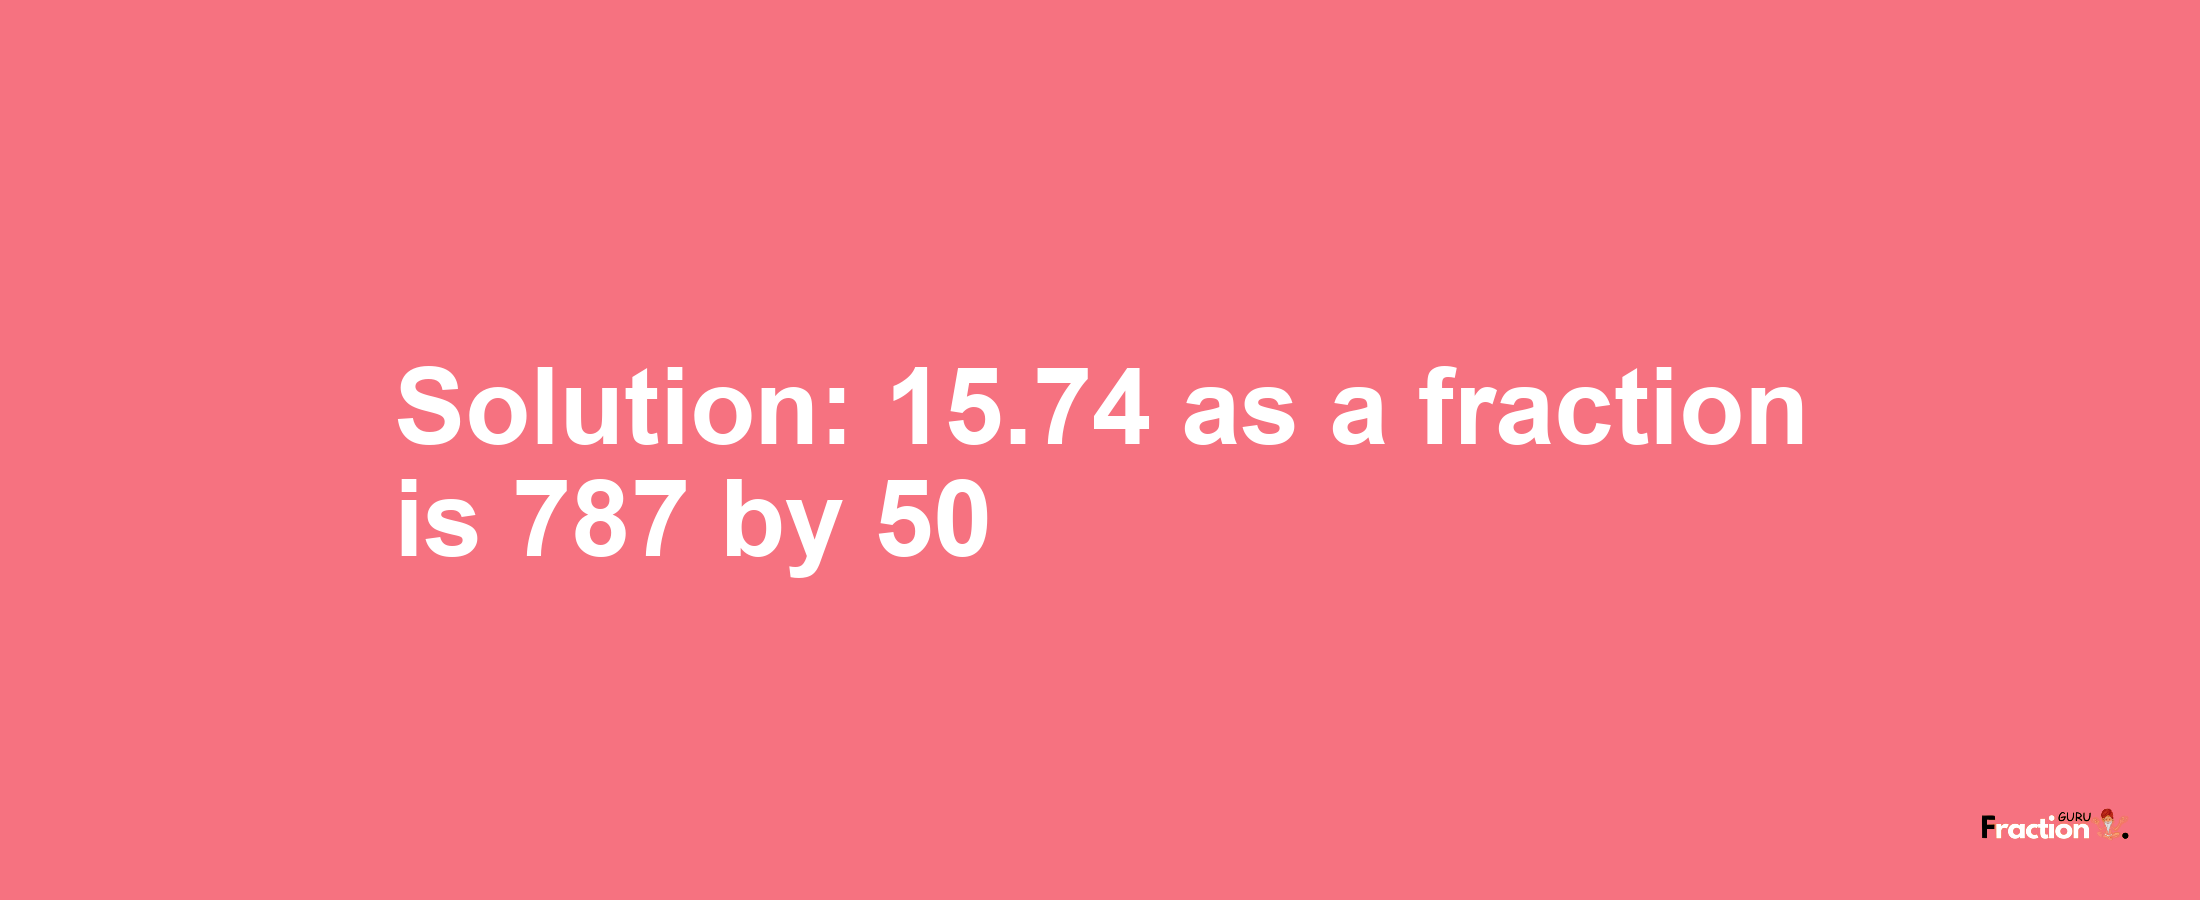 Solution:15.74 as a fraction is 787/50